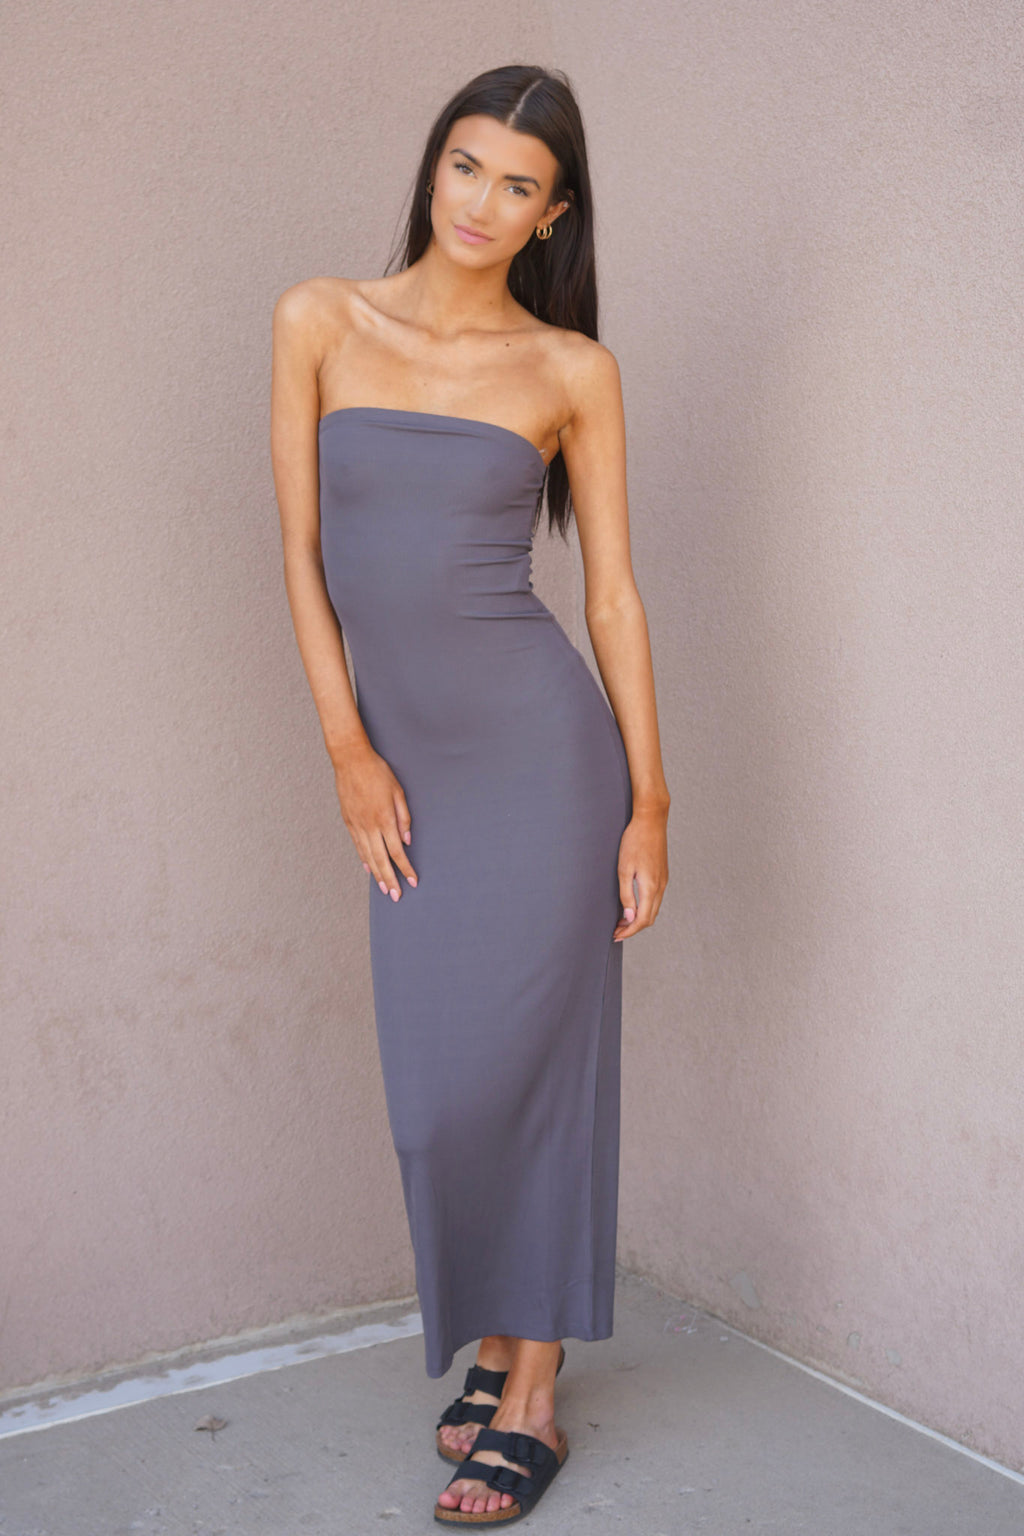 Claire Strapless Dress - Only